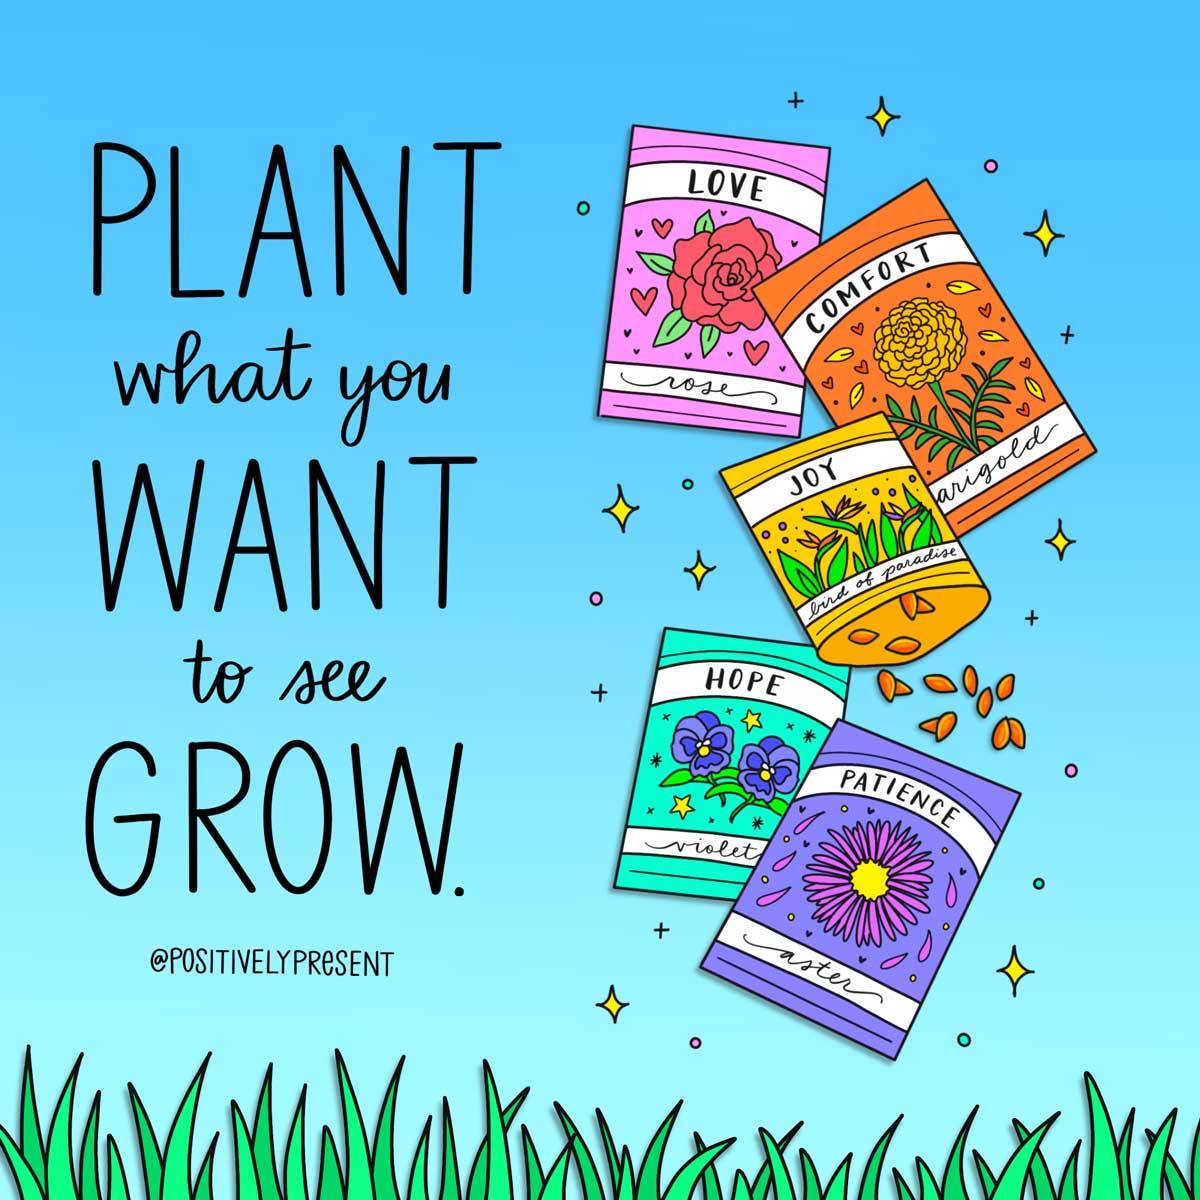 seed packets says plant what you want to see grow.